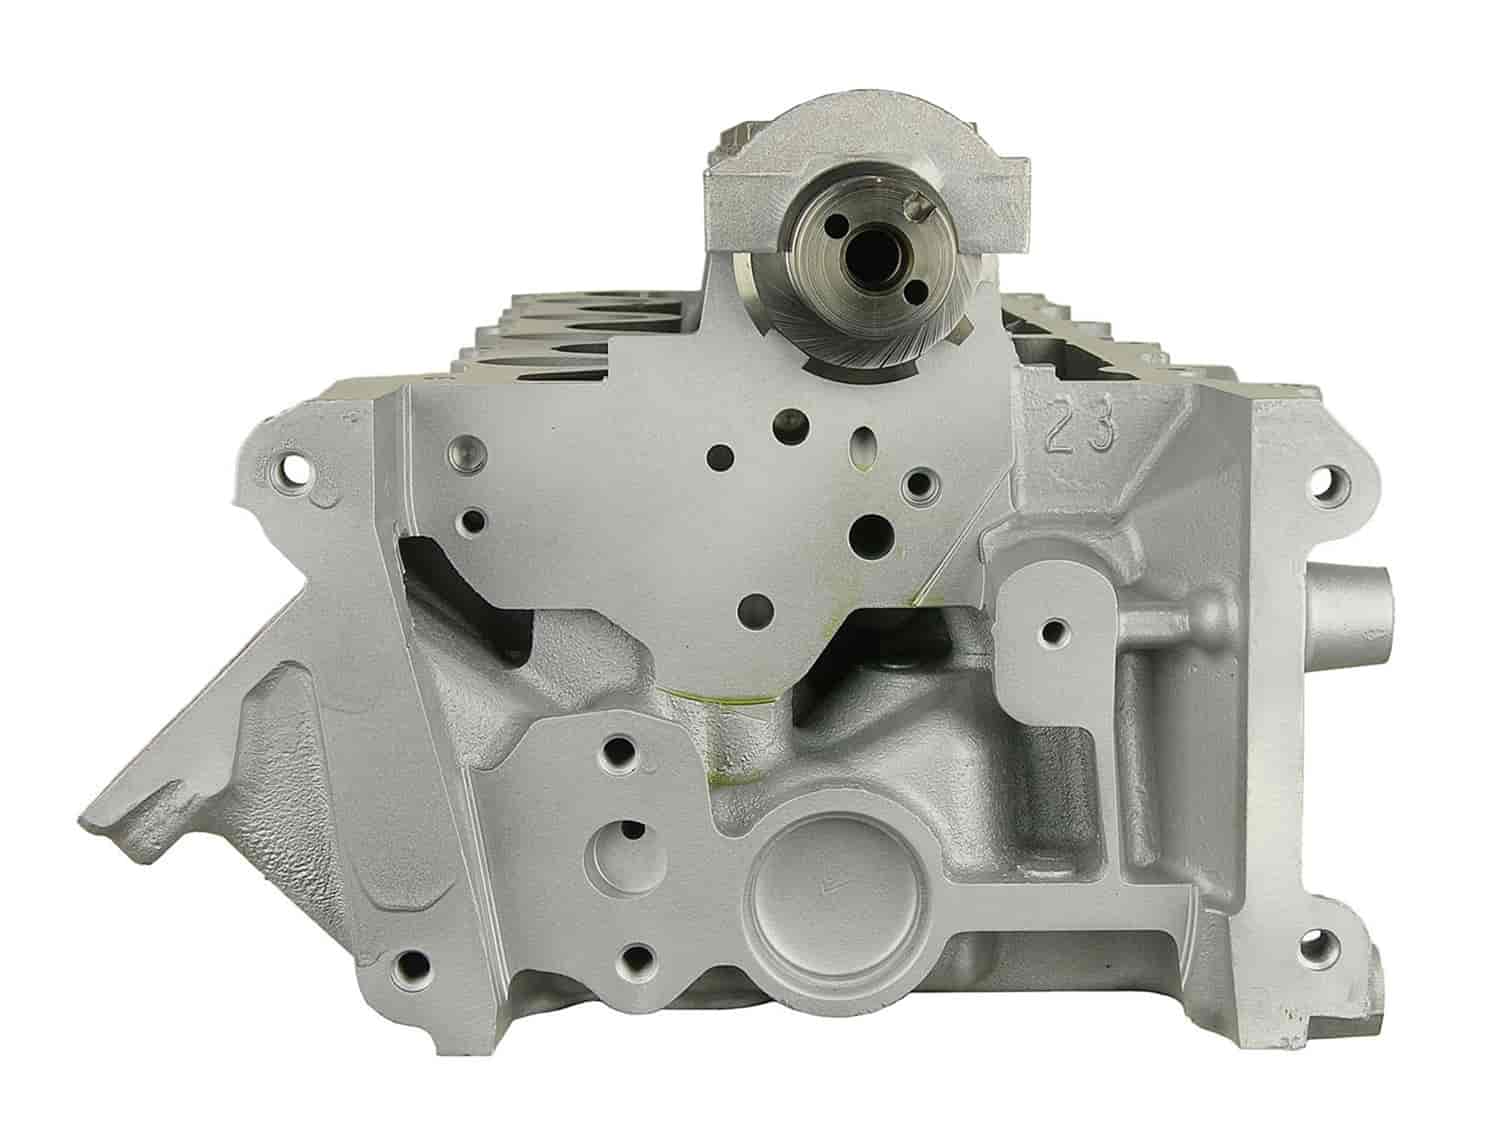 Remanufactured Cylinder Head for 2004-2008 Ford/Lincoln/Mercury with 4.6/5.4L V8